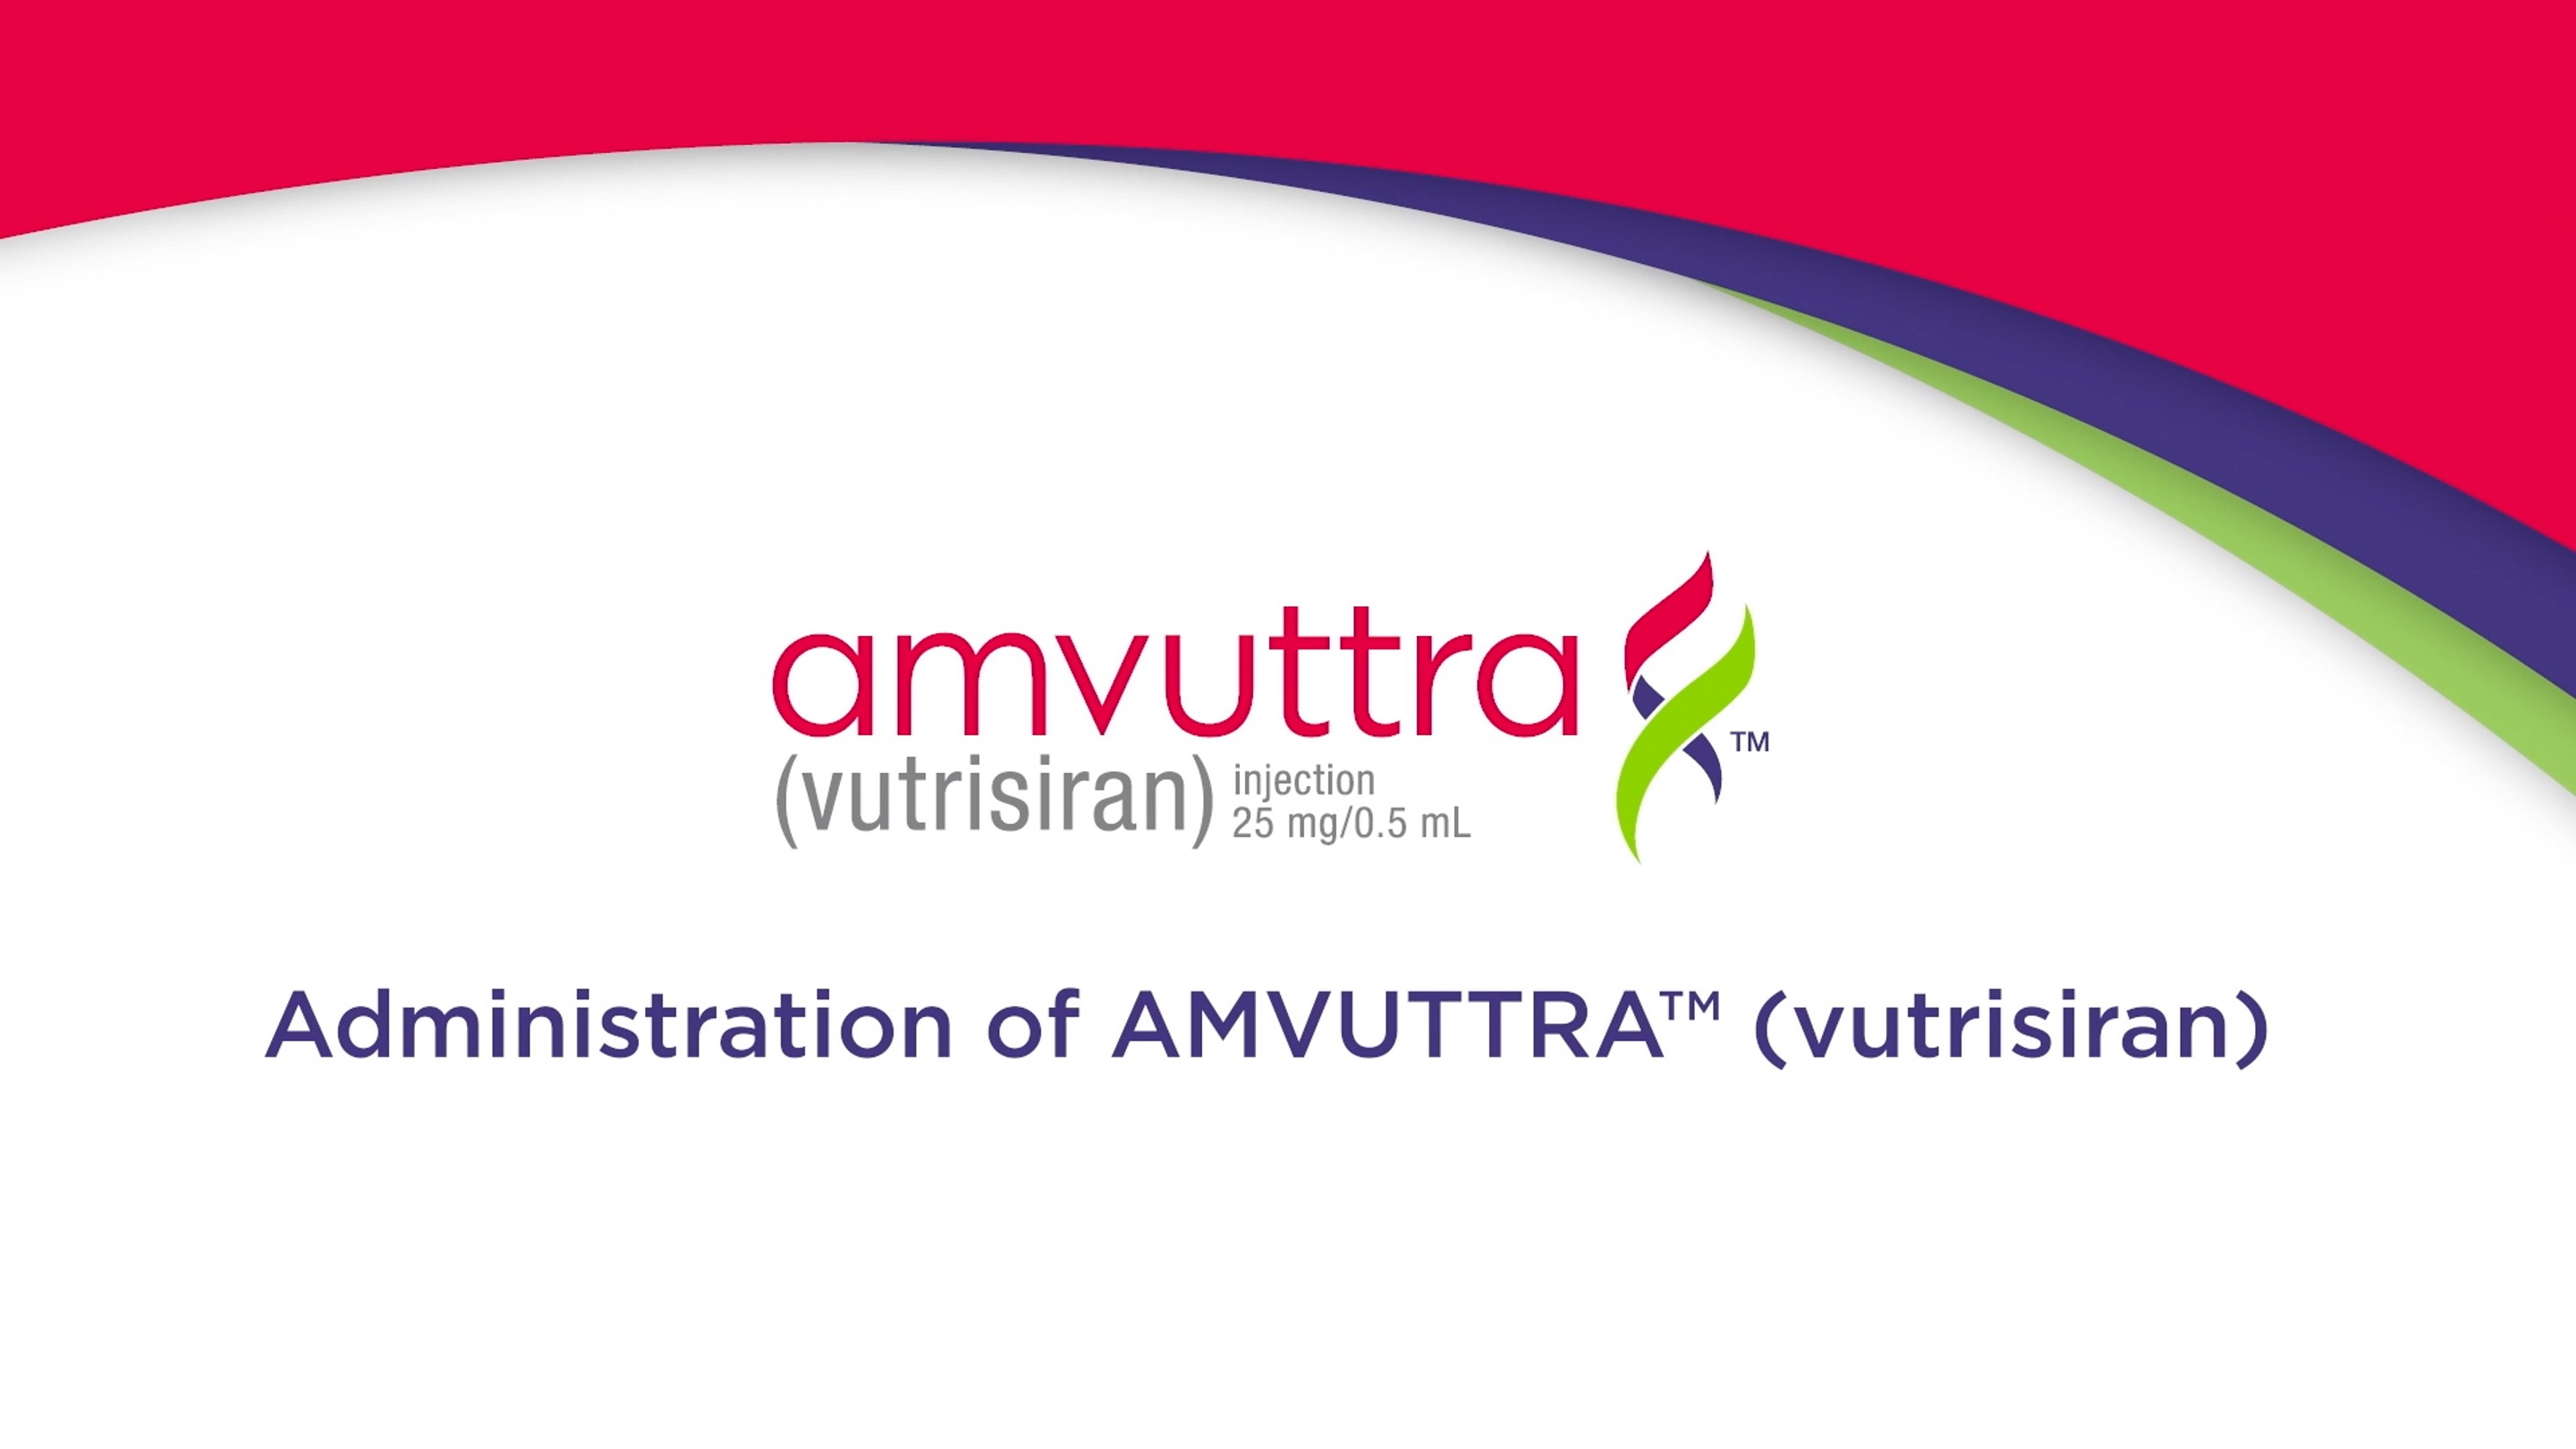 Administration of AMVUTTRA™ (vutrisiran) video